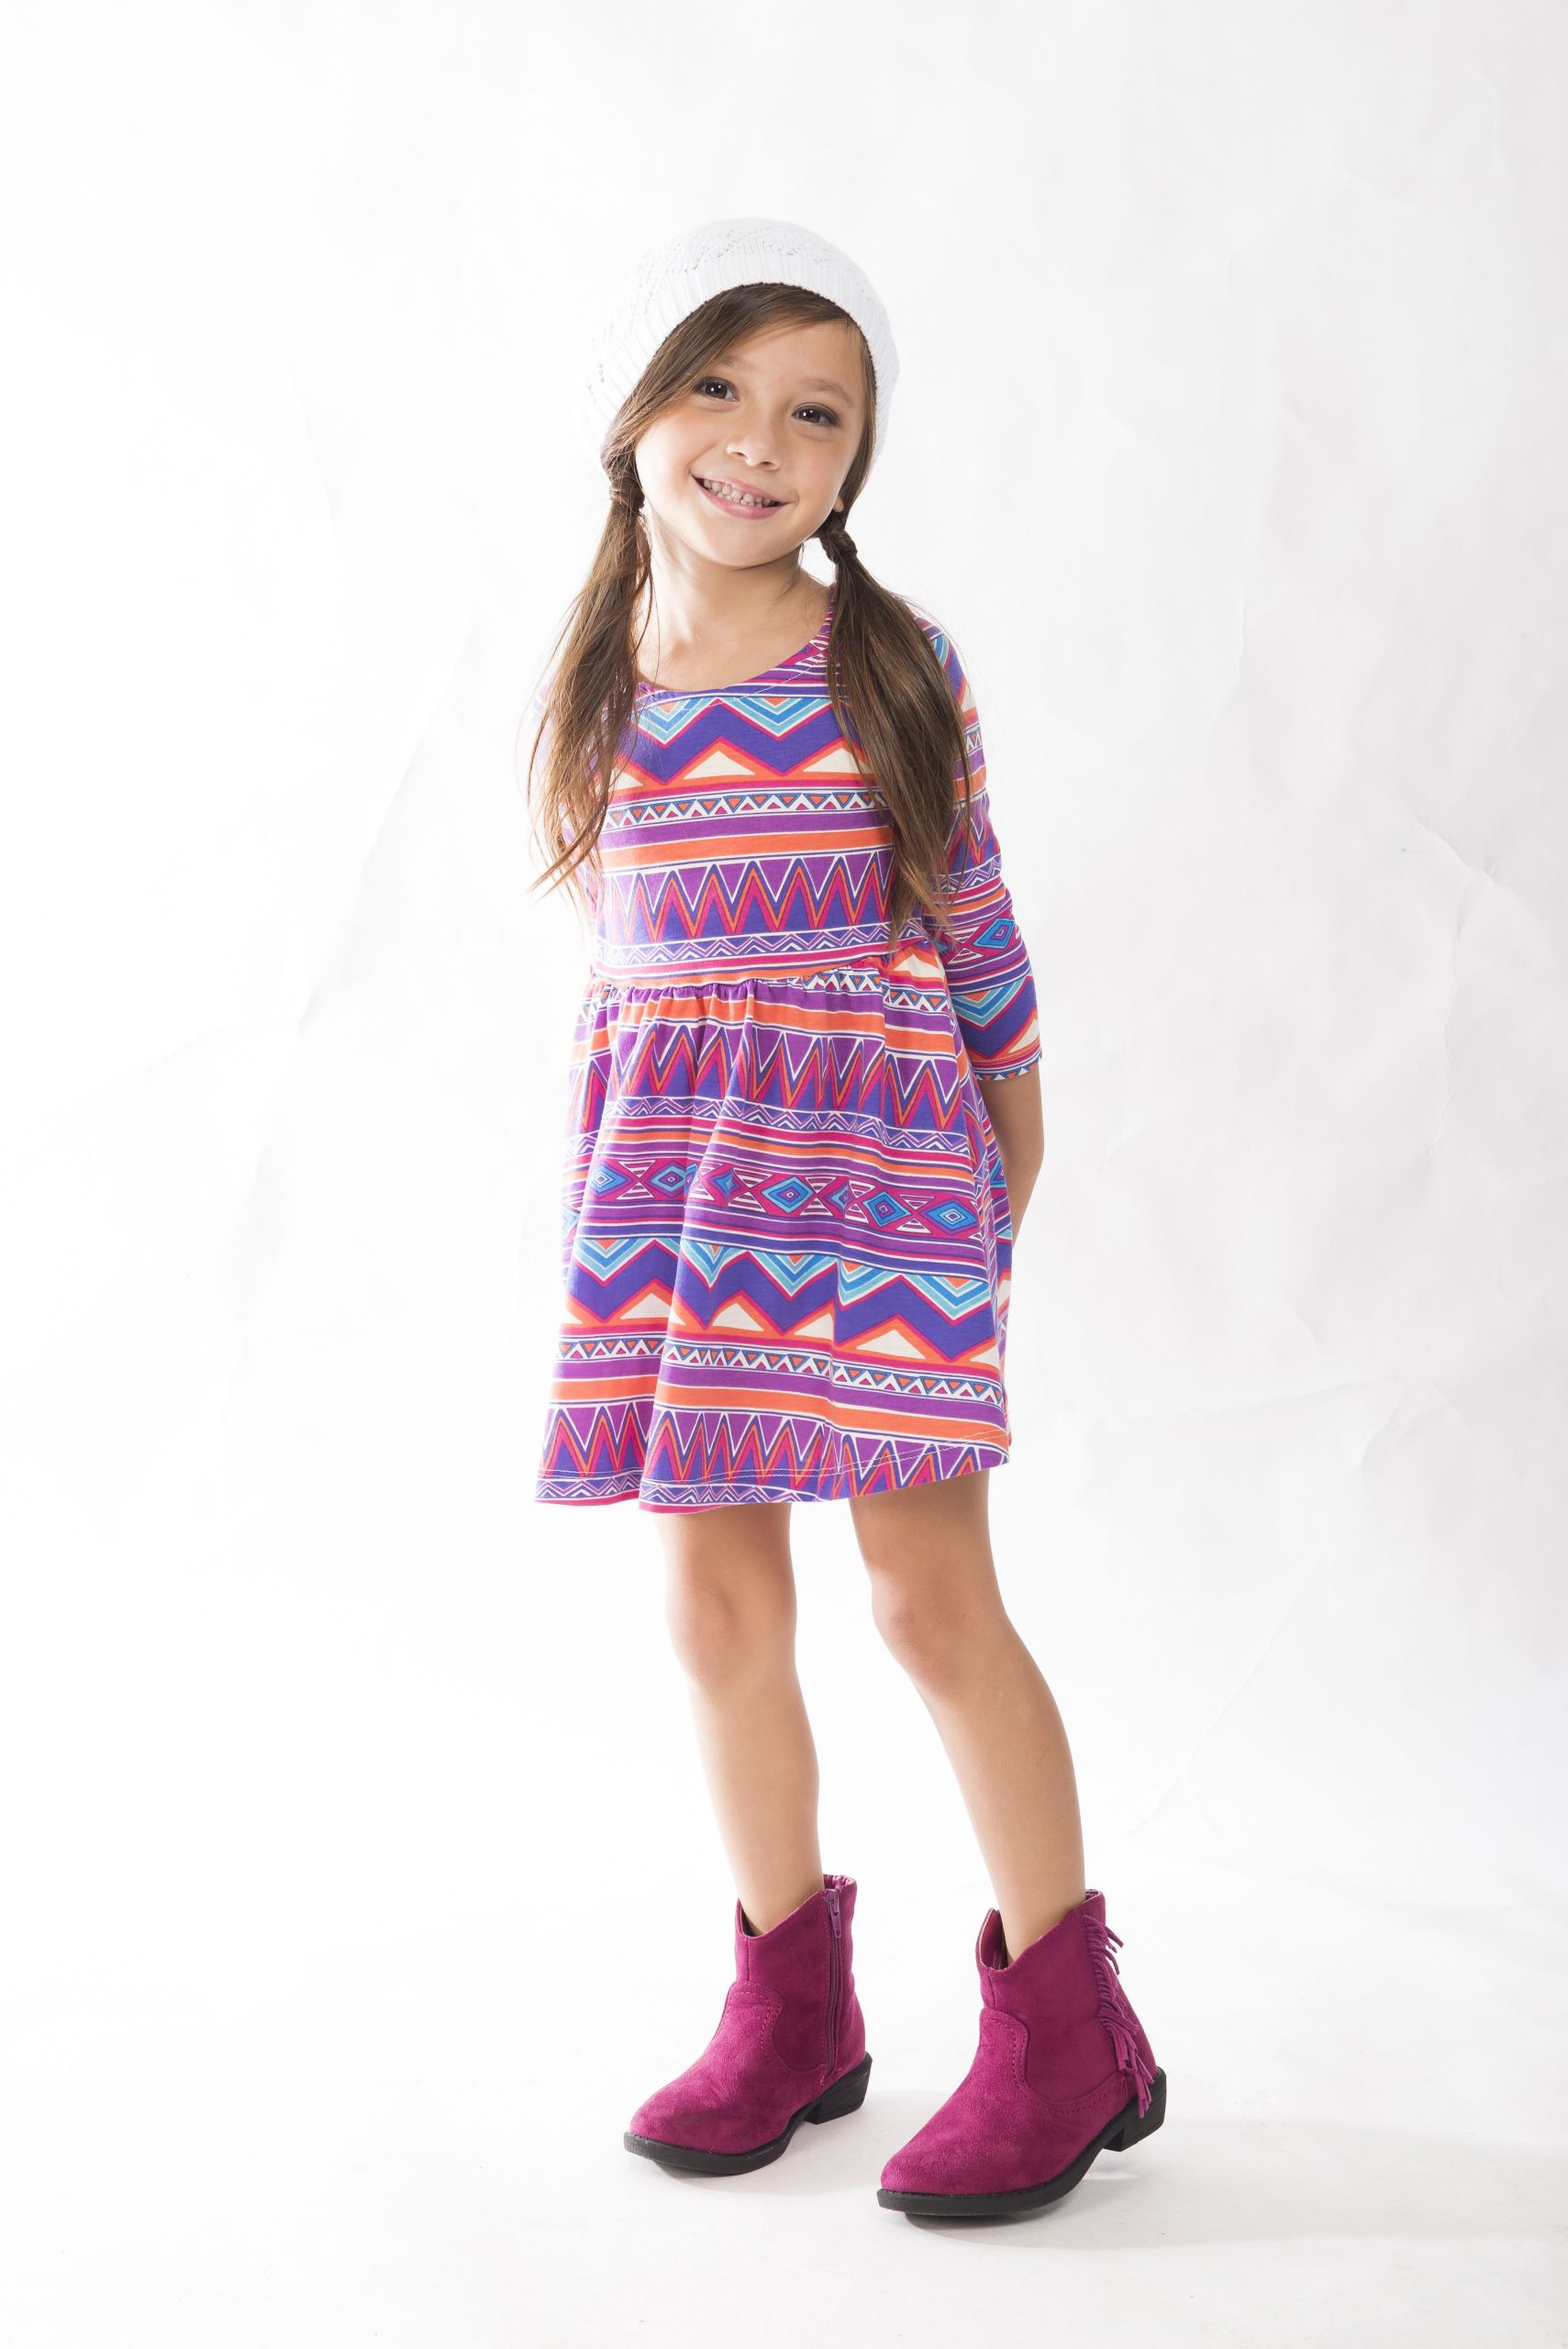 Children Fashion Model
 Stylish Clothes Kids Love from FabKids